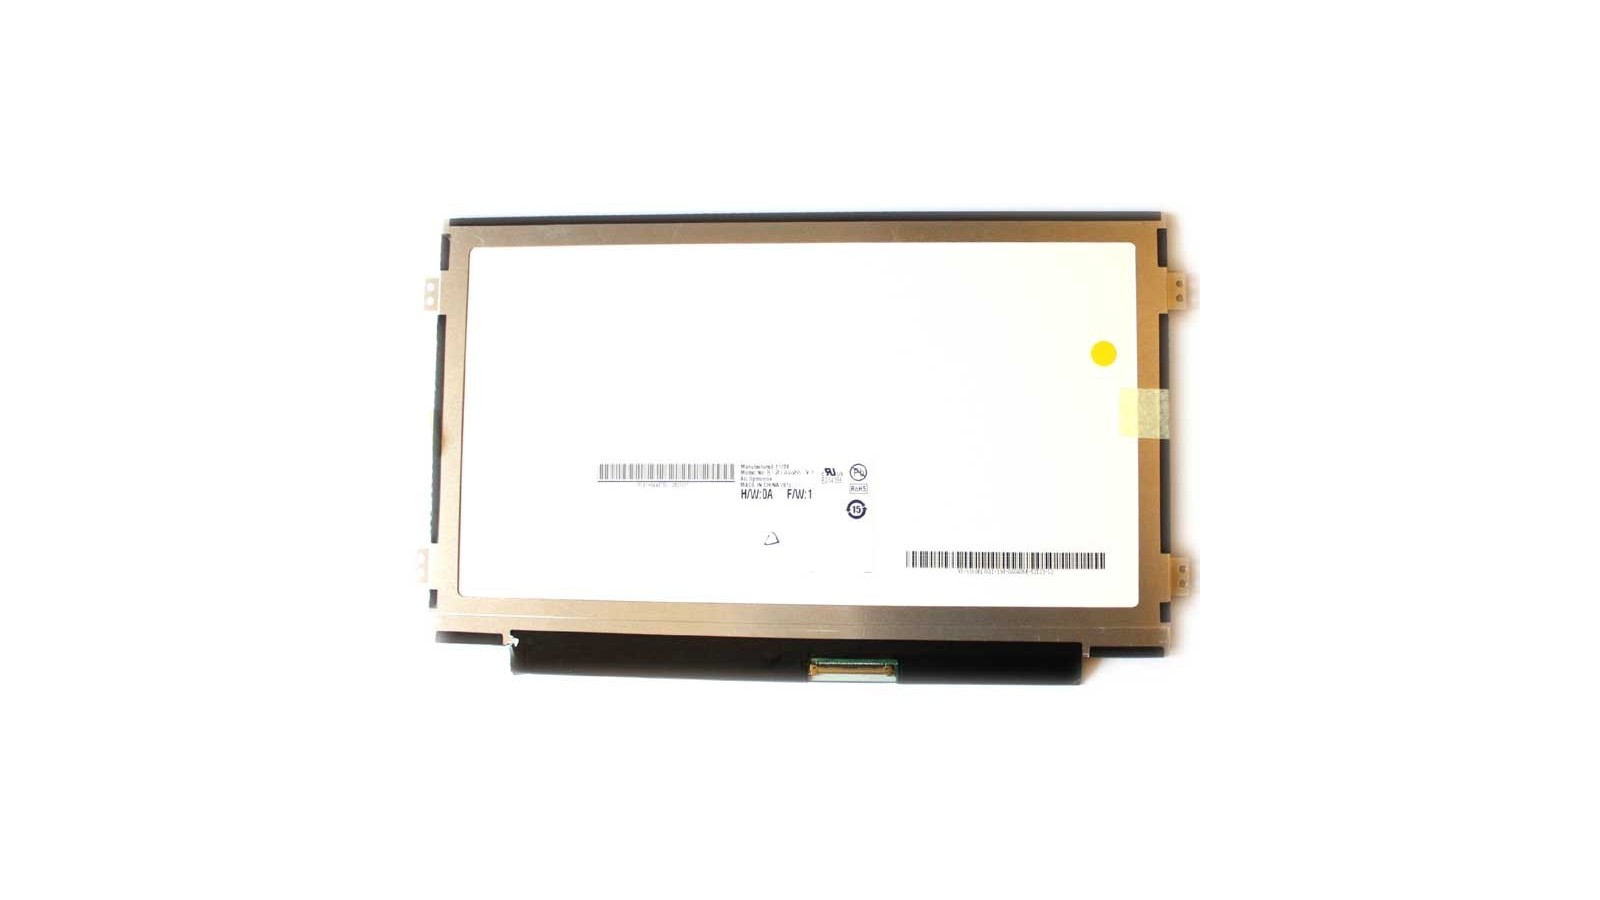 LCD DISPLAY SCHERMO 10.1 B101AW06 Acer Aspire One Happy2